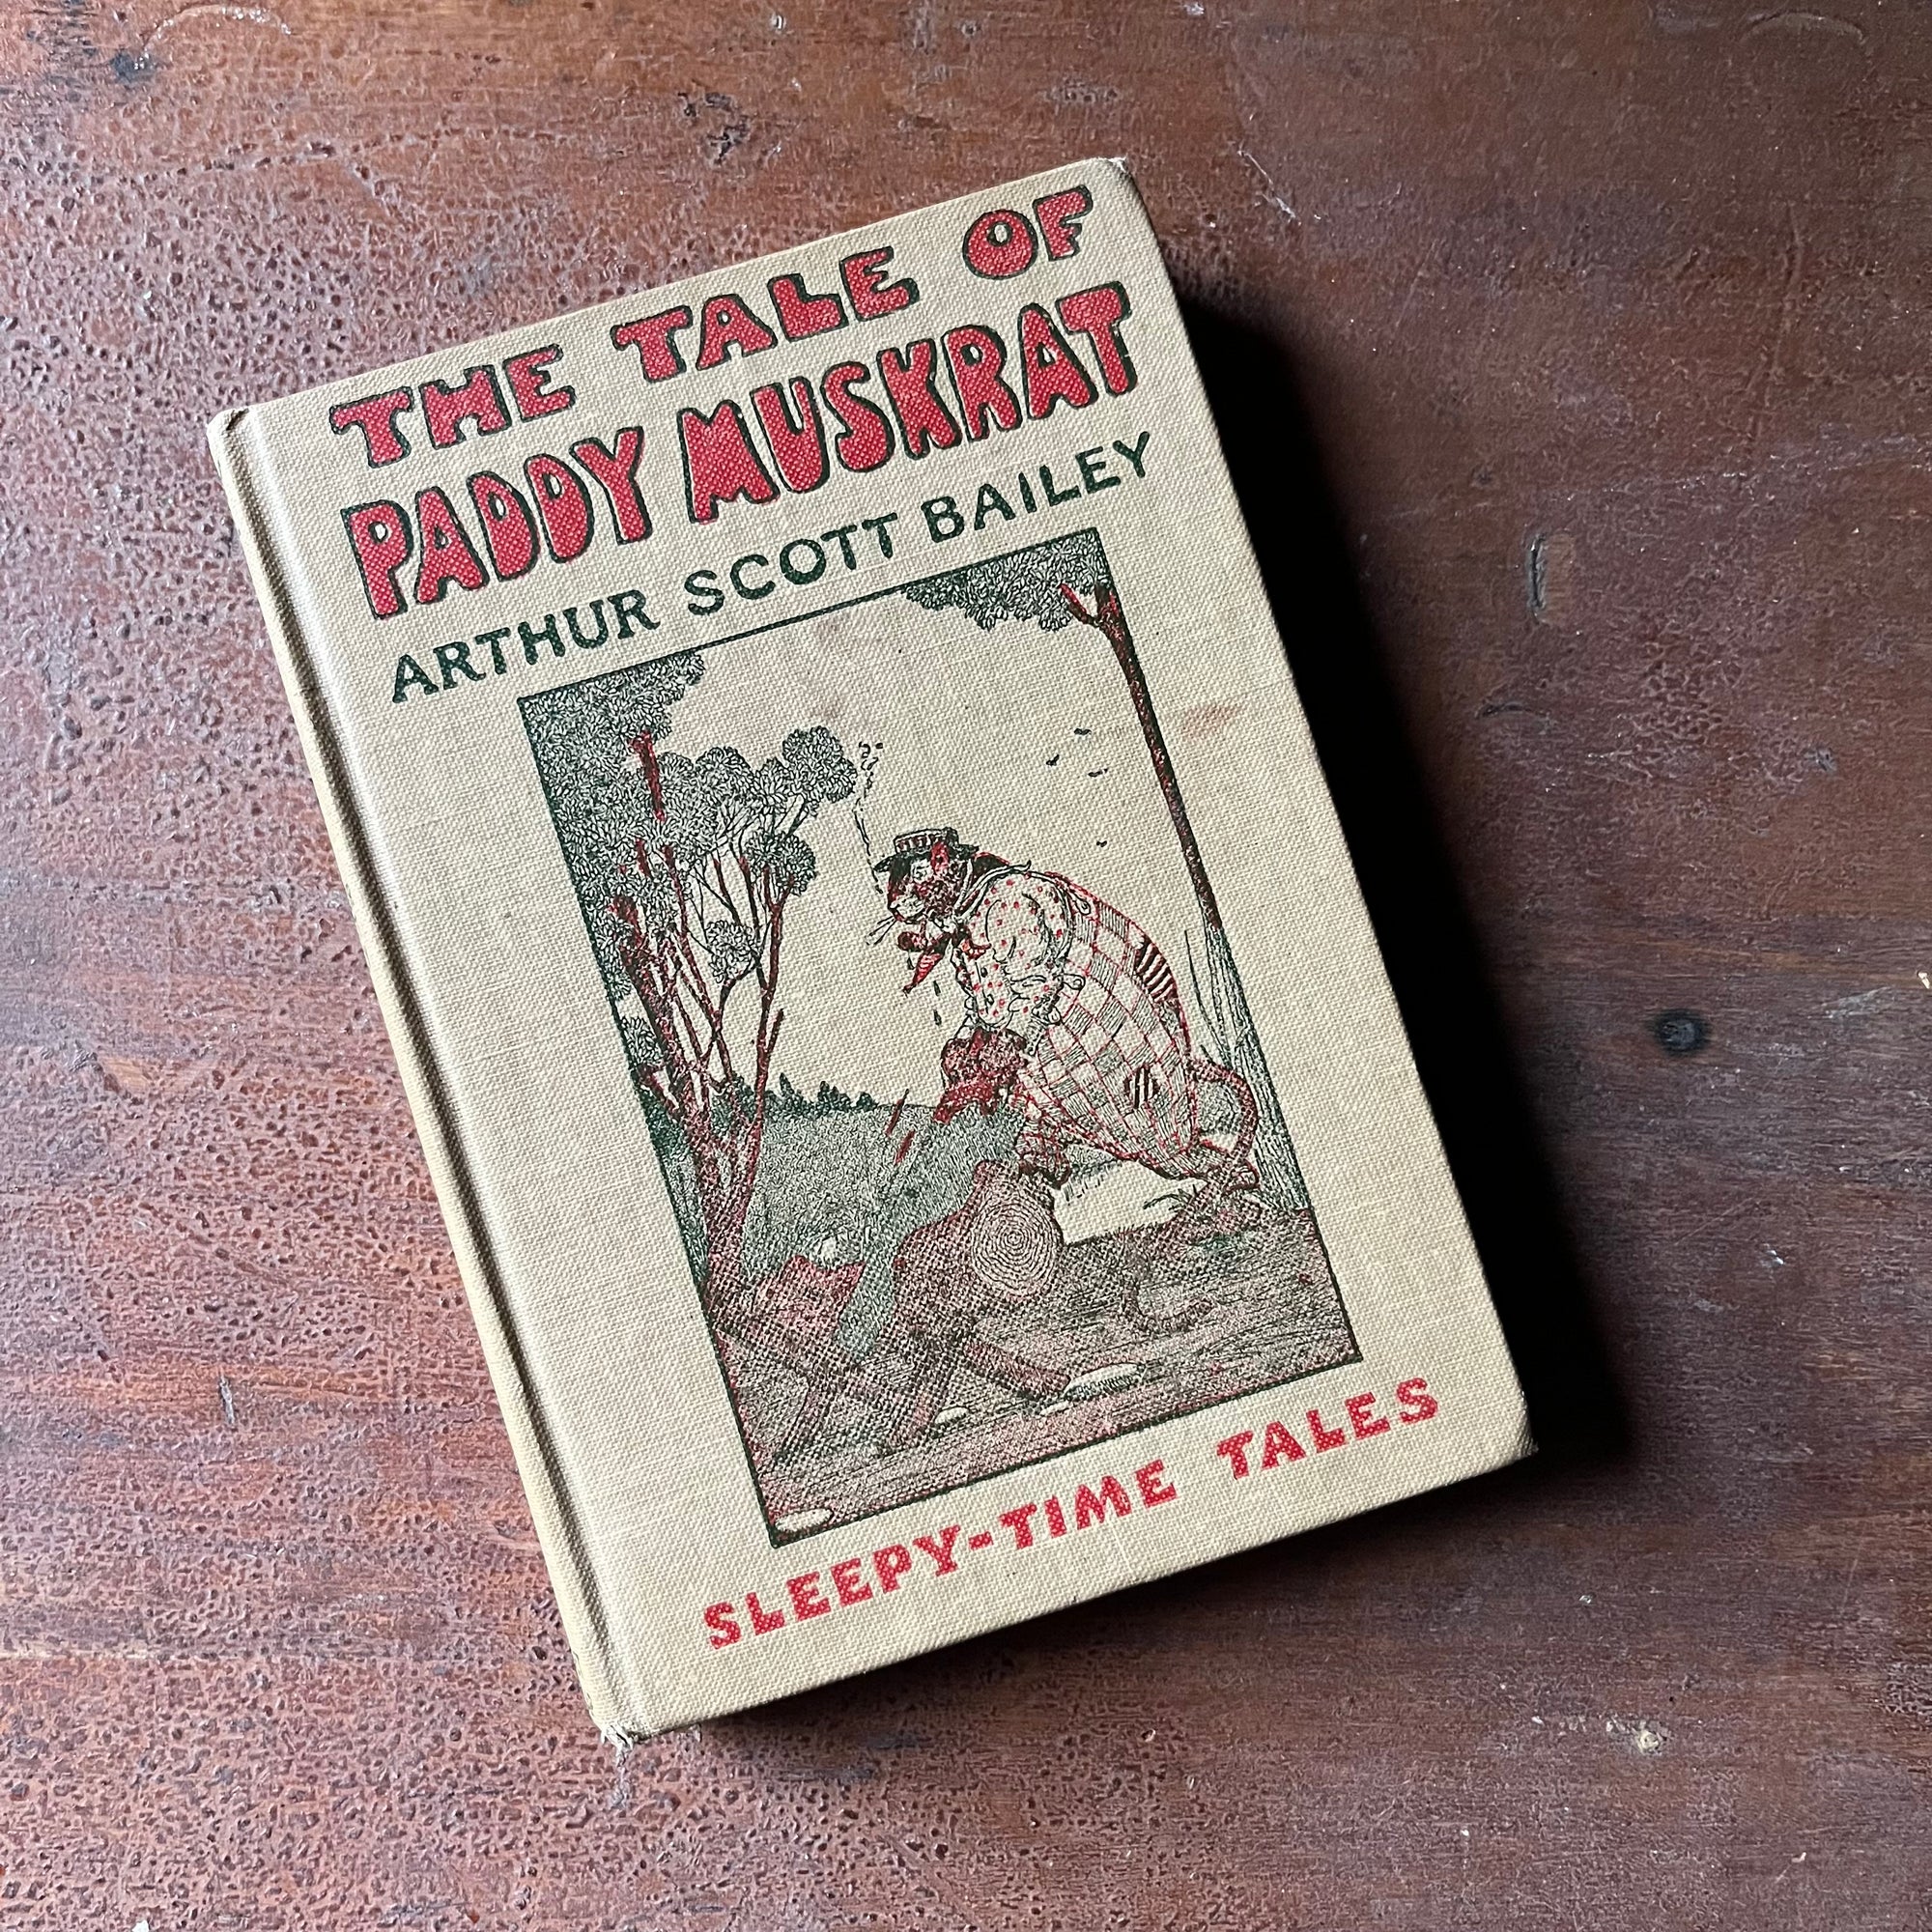 The Tale of Paddy Muskrat:  Sleepy-Time Tales by Arthur Scott Bailey - view of the embossed front cover